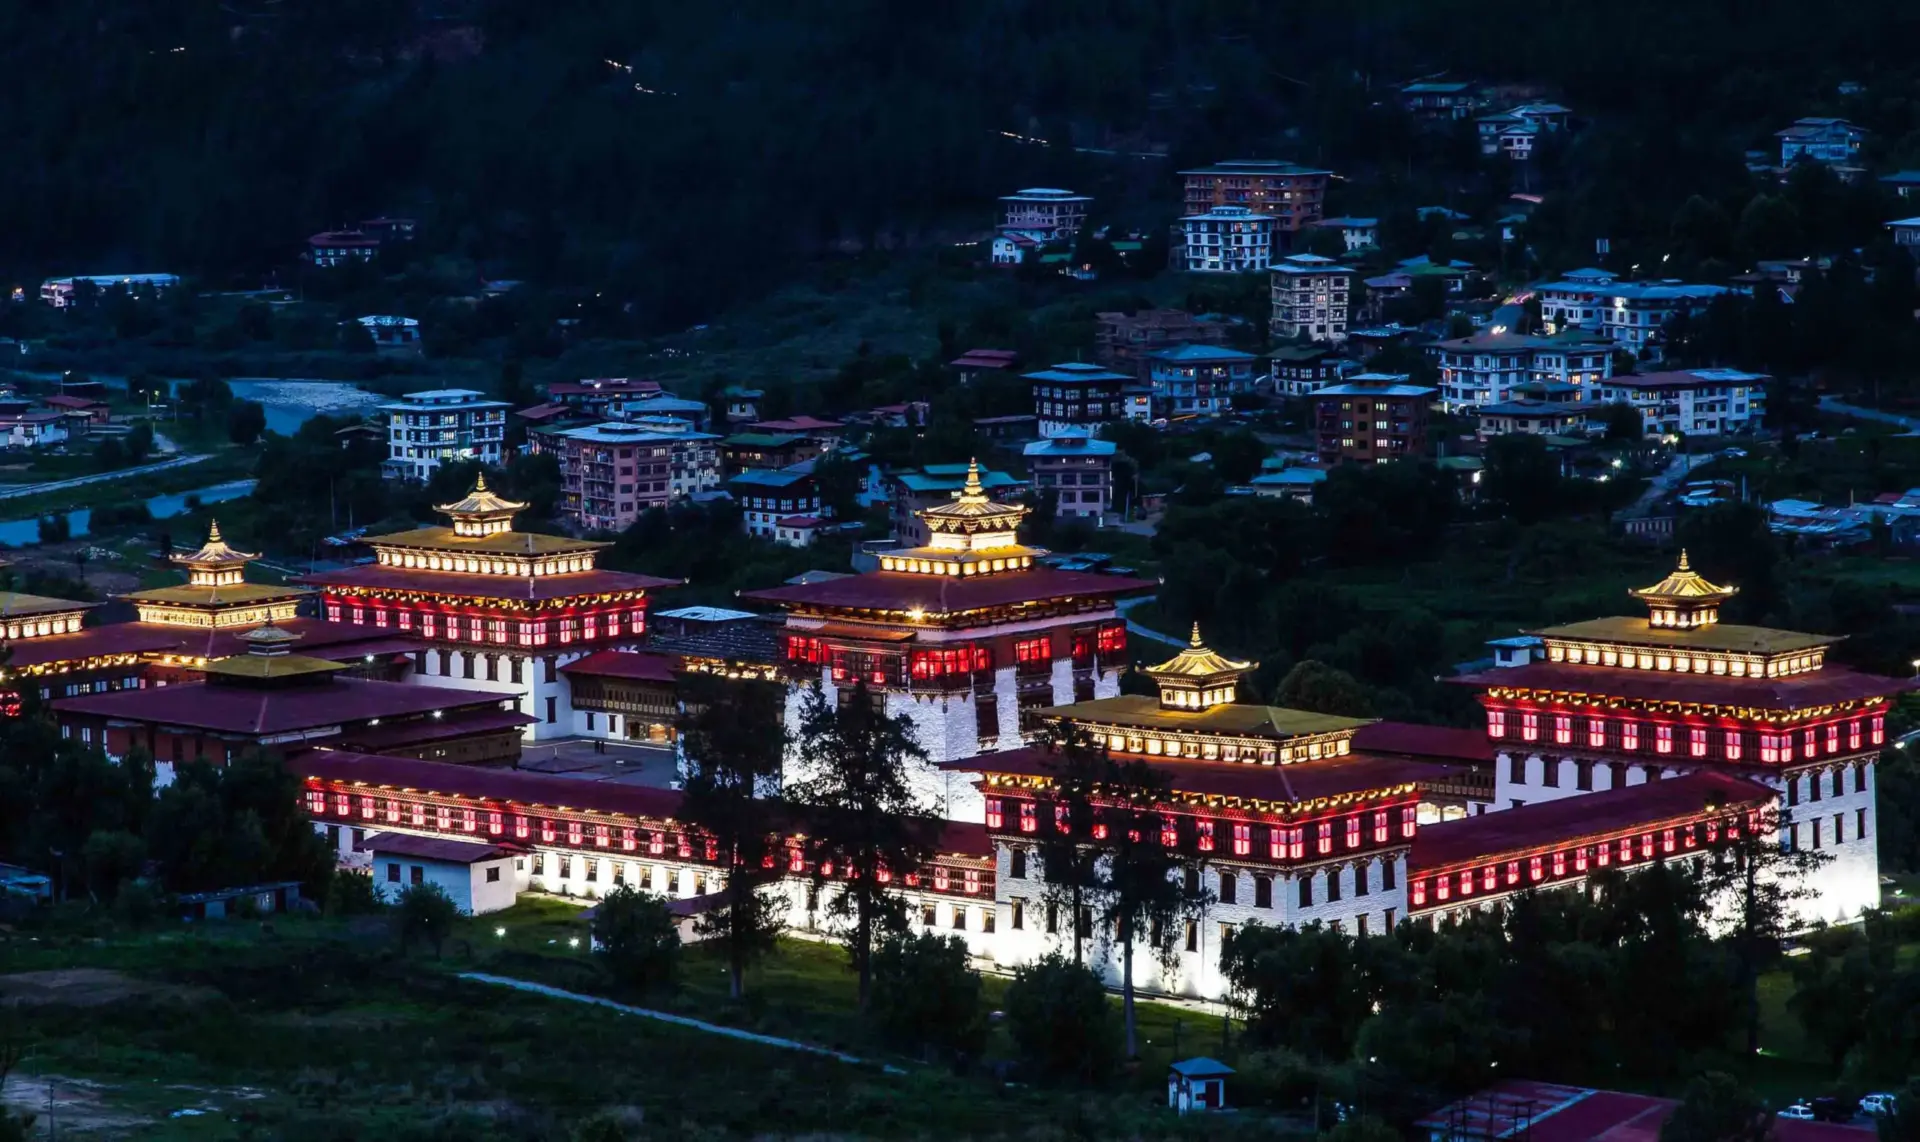 Tashichho Dzong scaled Bhutan Weather In January,Average Temperature in January,Snowfall in January,Weather Patterns in January,Bhutan in January,Clothing and Packing Tips,Road Conditions and Travel Tips,January in Bhutan,Bhutan weather during January